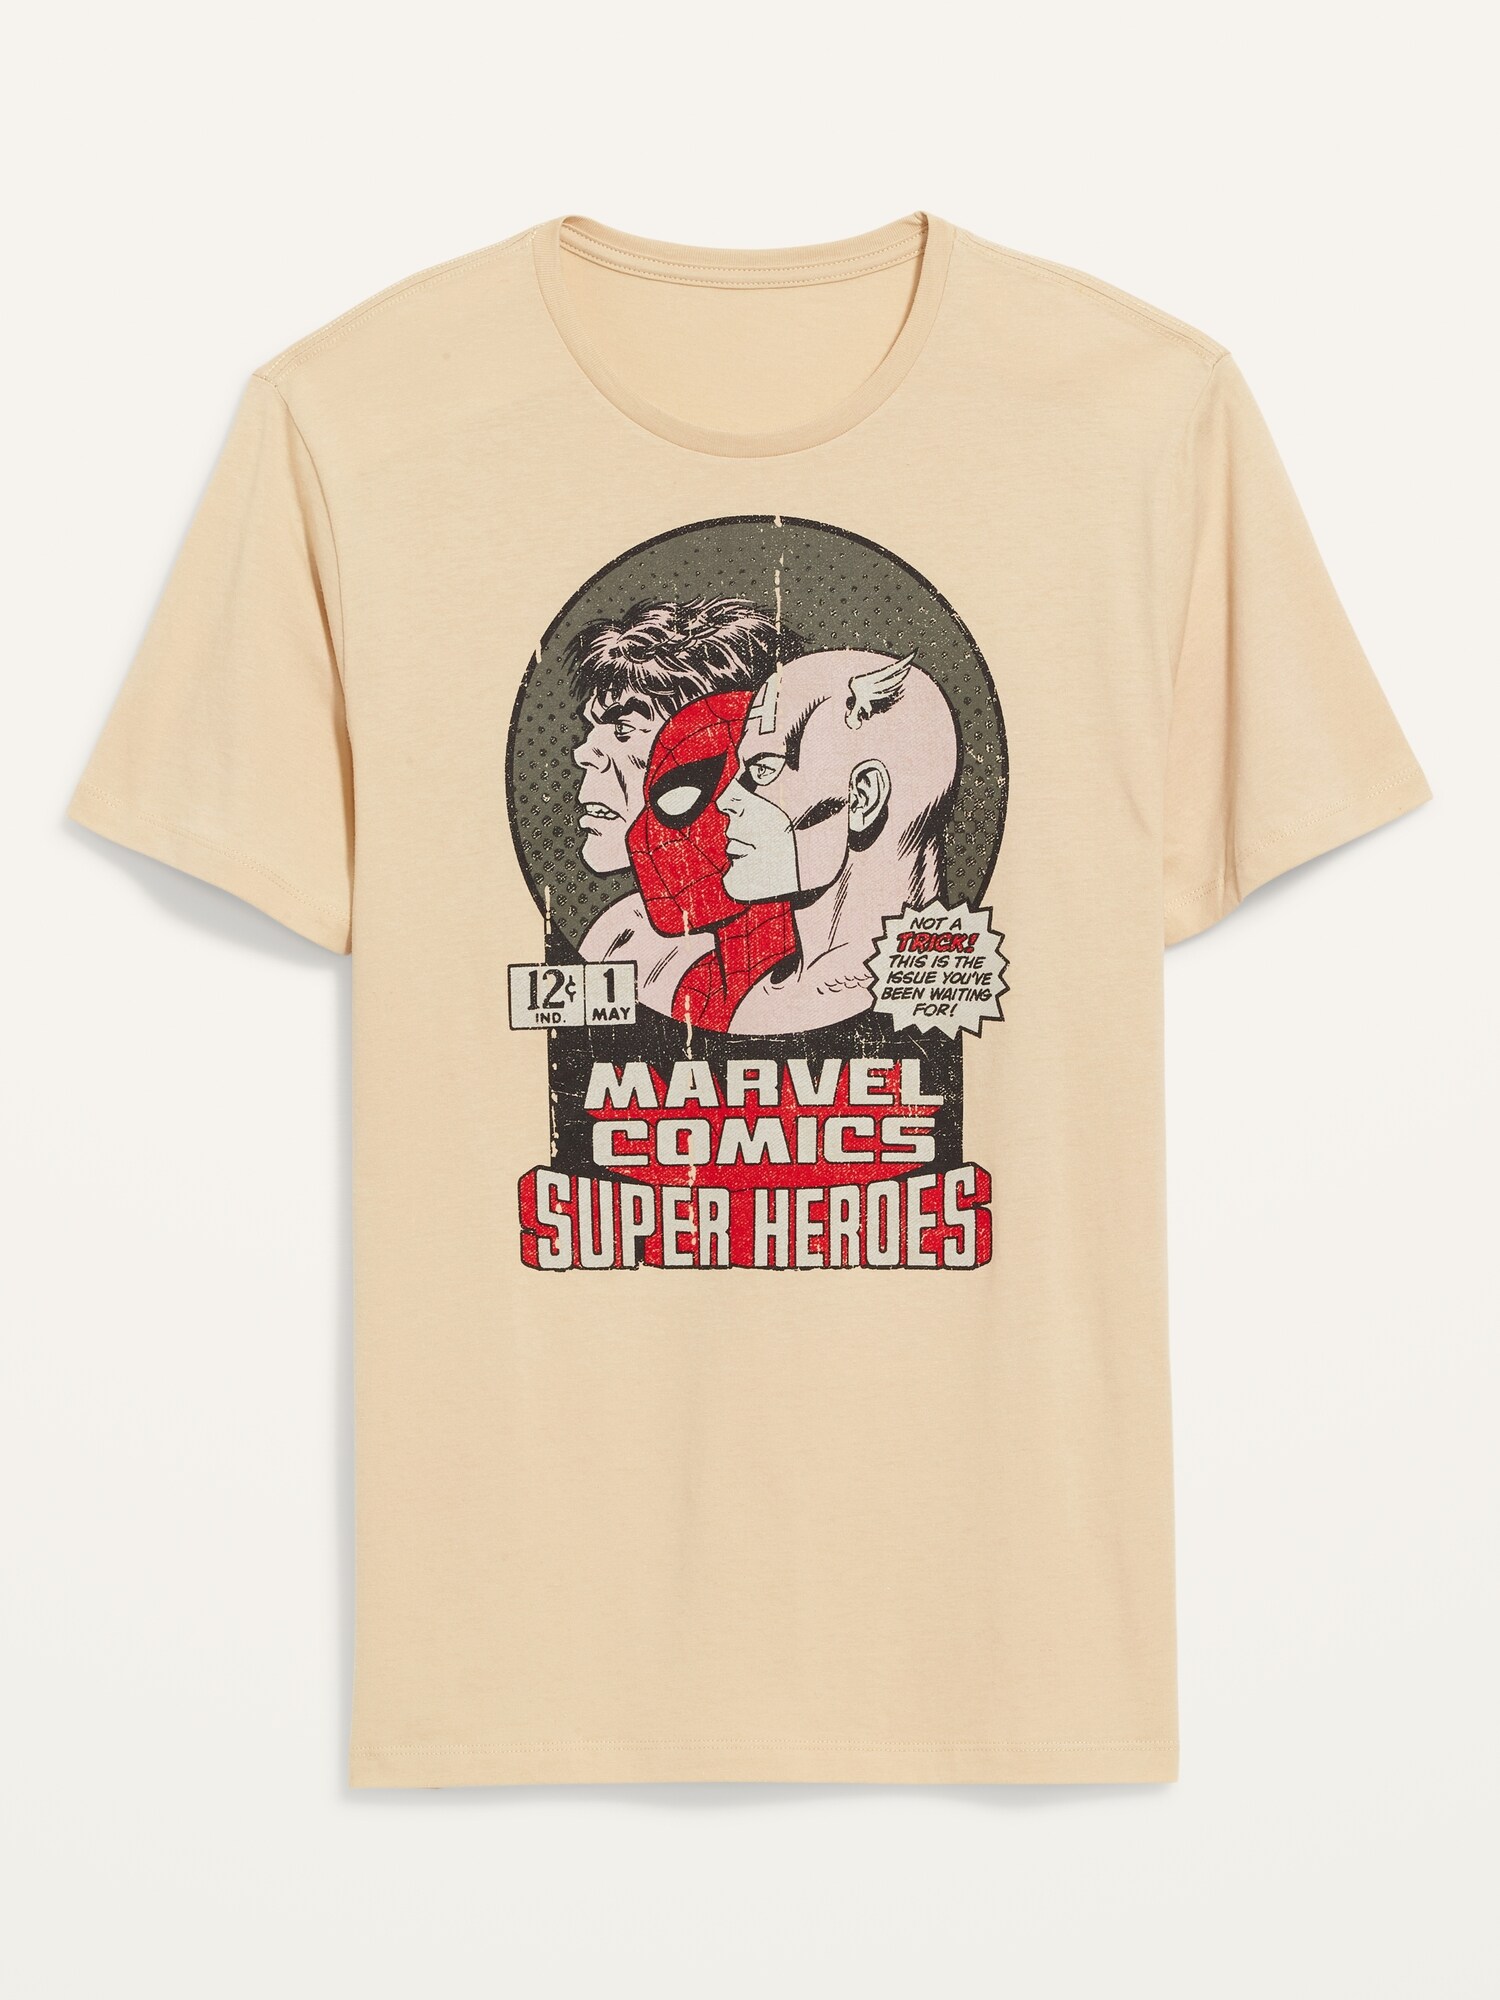 Marvel Comics™ Super Heroes Gender Neutral T Shirt For Adults Old Navy 